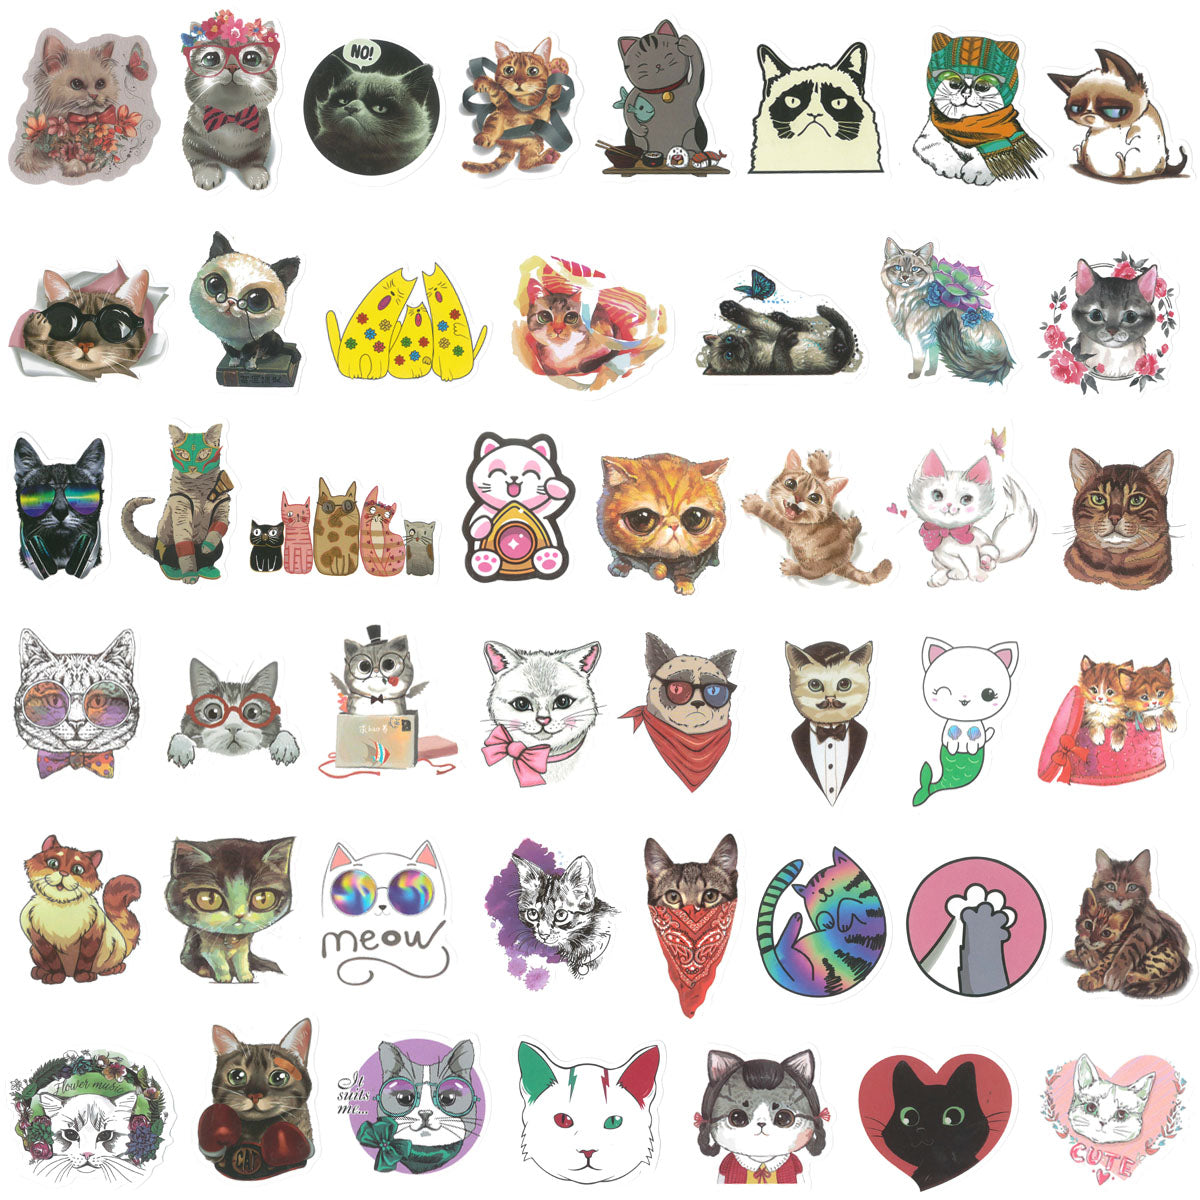 Wrapables Waterproof Vinyl Stickers for Water Bottles, Laptop, Phones, Skateboards, Decals for Teens 100pcs, Baby Animals